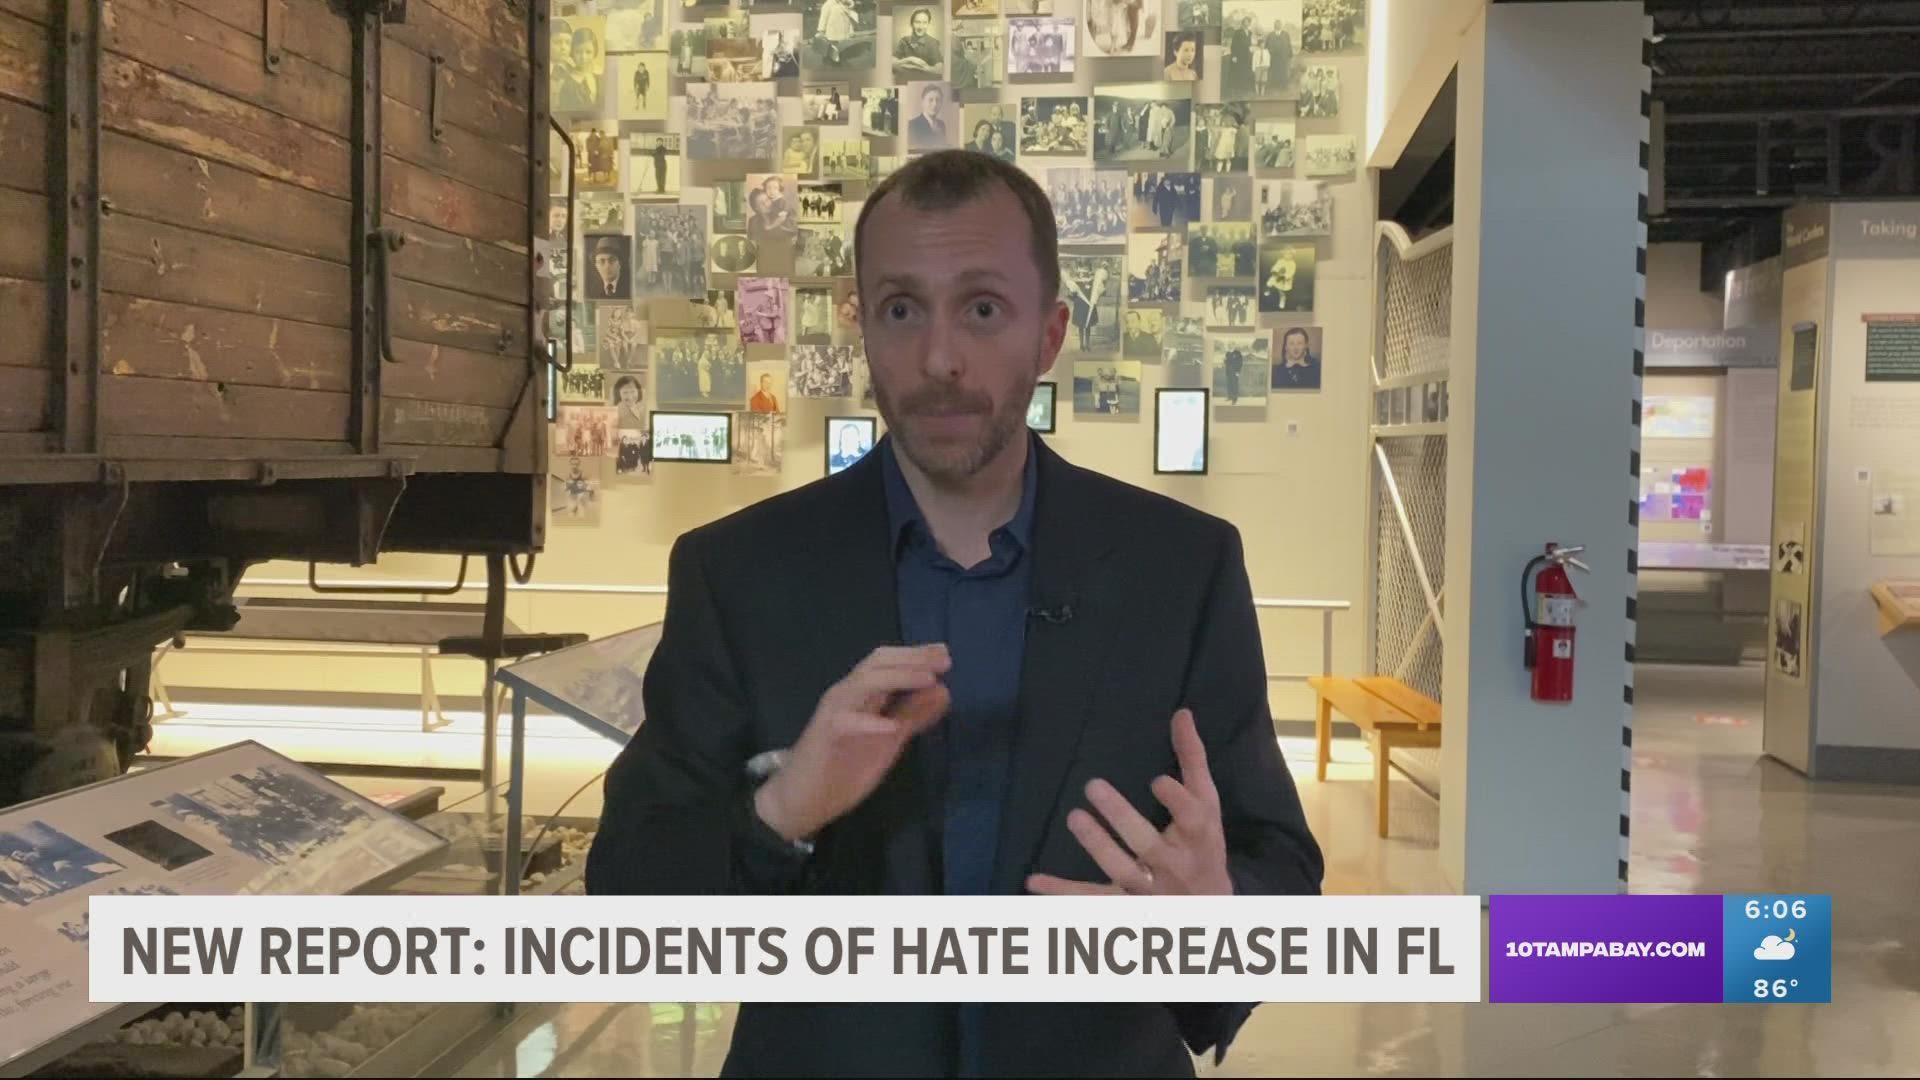 The report by the Anti-Defamation League examines the extremist and antisemitic trends and incidents in the state of Florida from 2020 to the present.